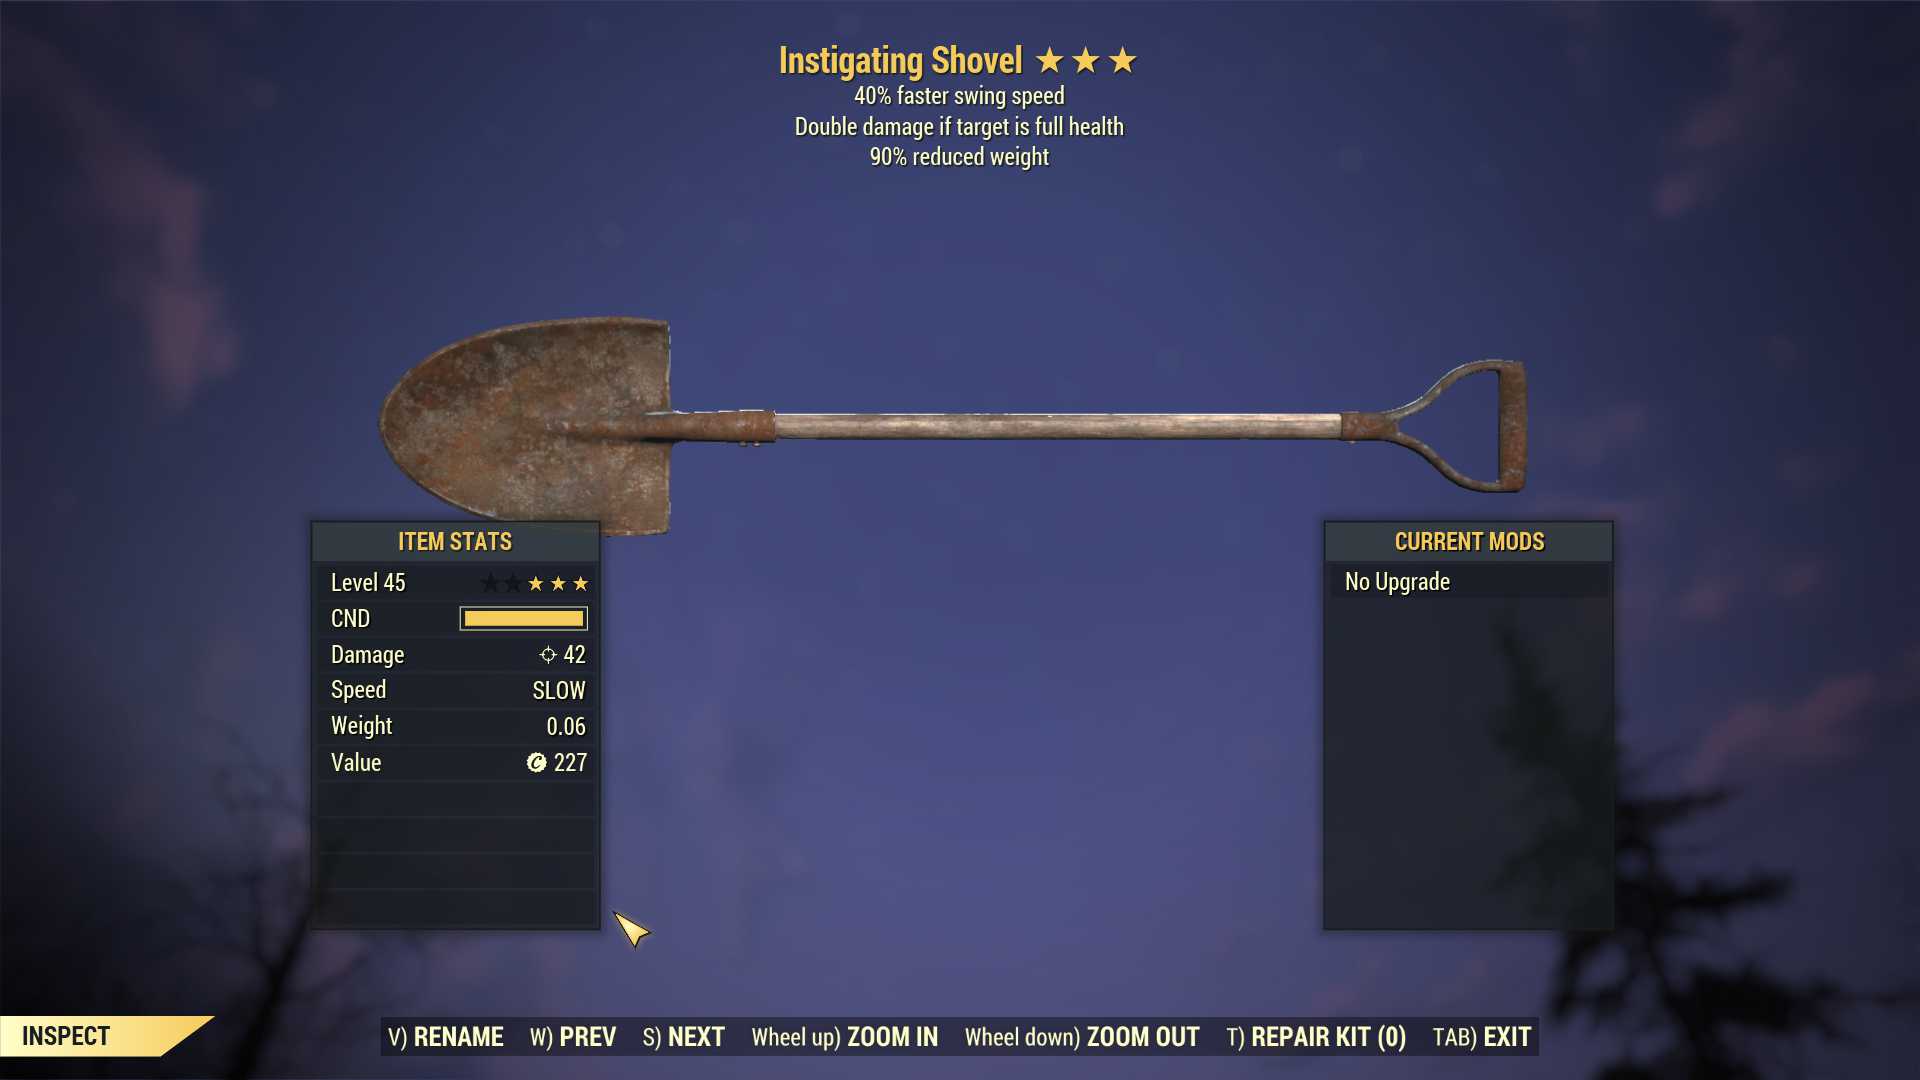 Instigating Shovel (40% Faster Swing Speed, 90% reduced weight)